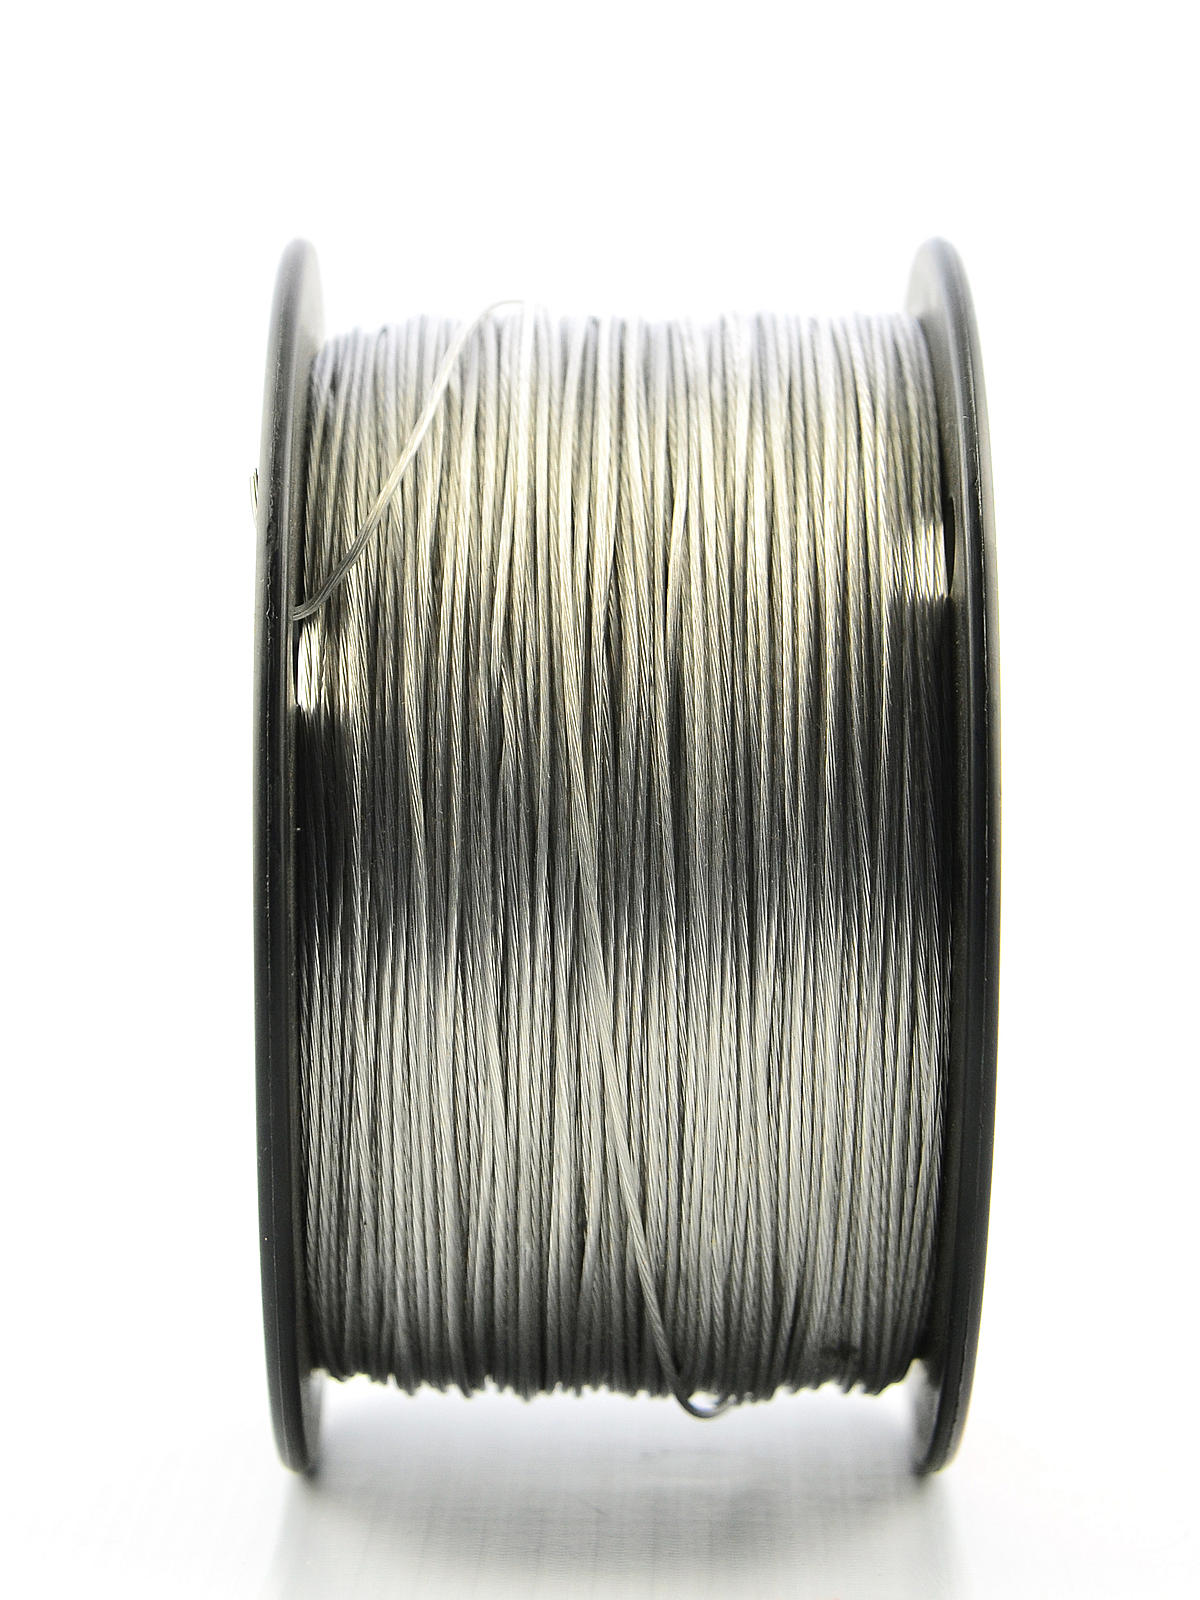 Braided Picture Wire 20 Lbs. Medium 5 Lb. Spool